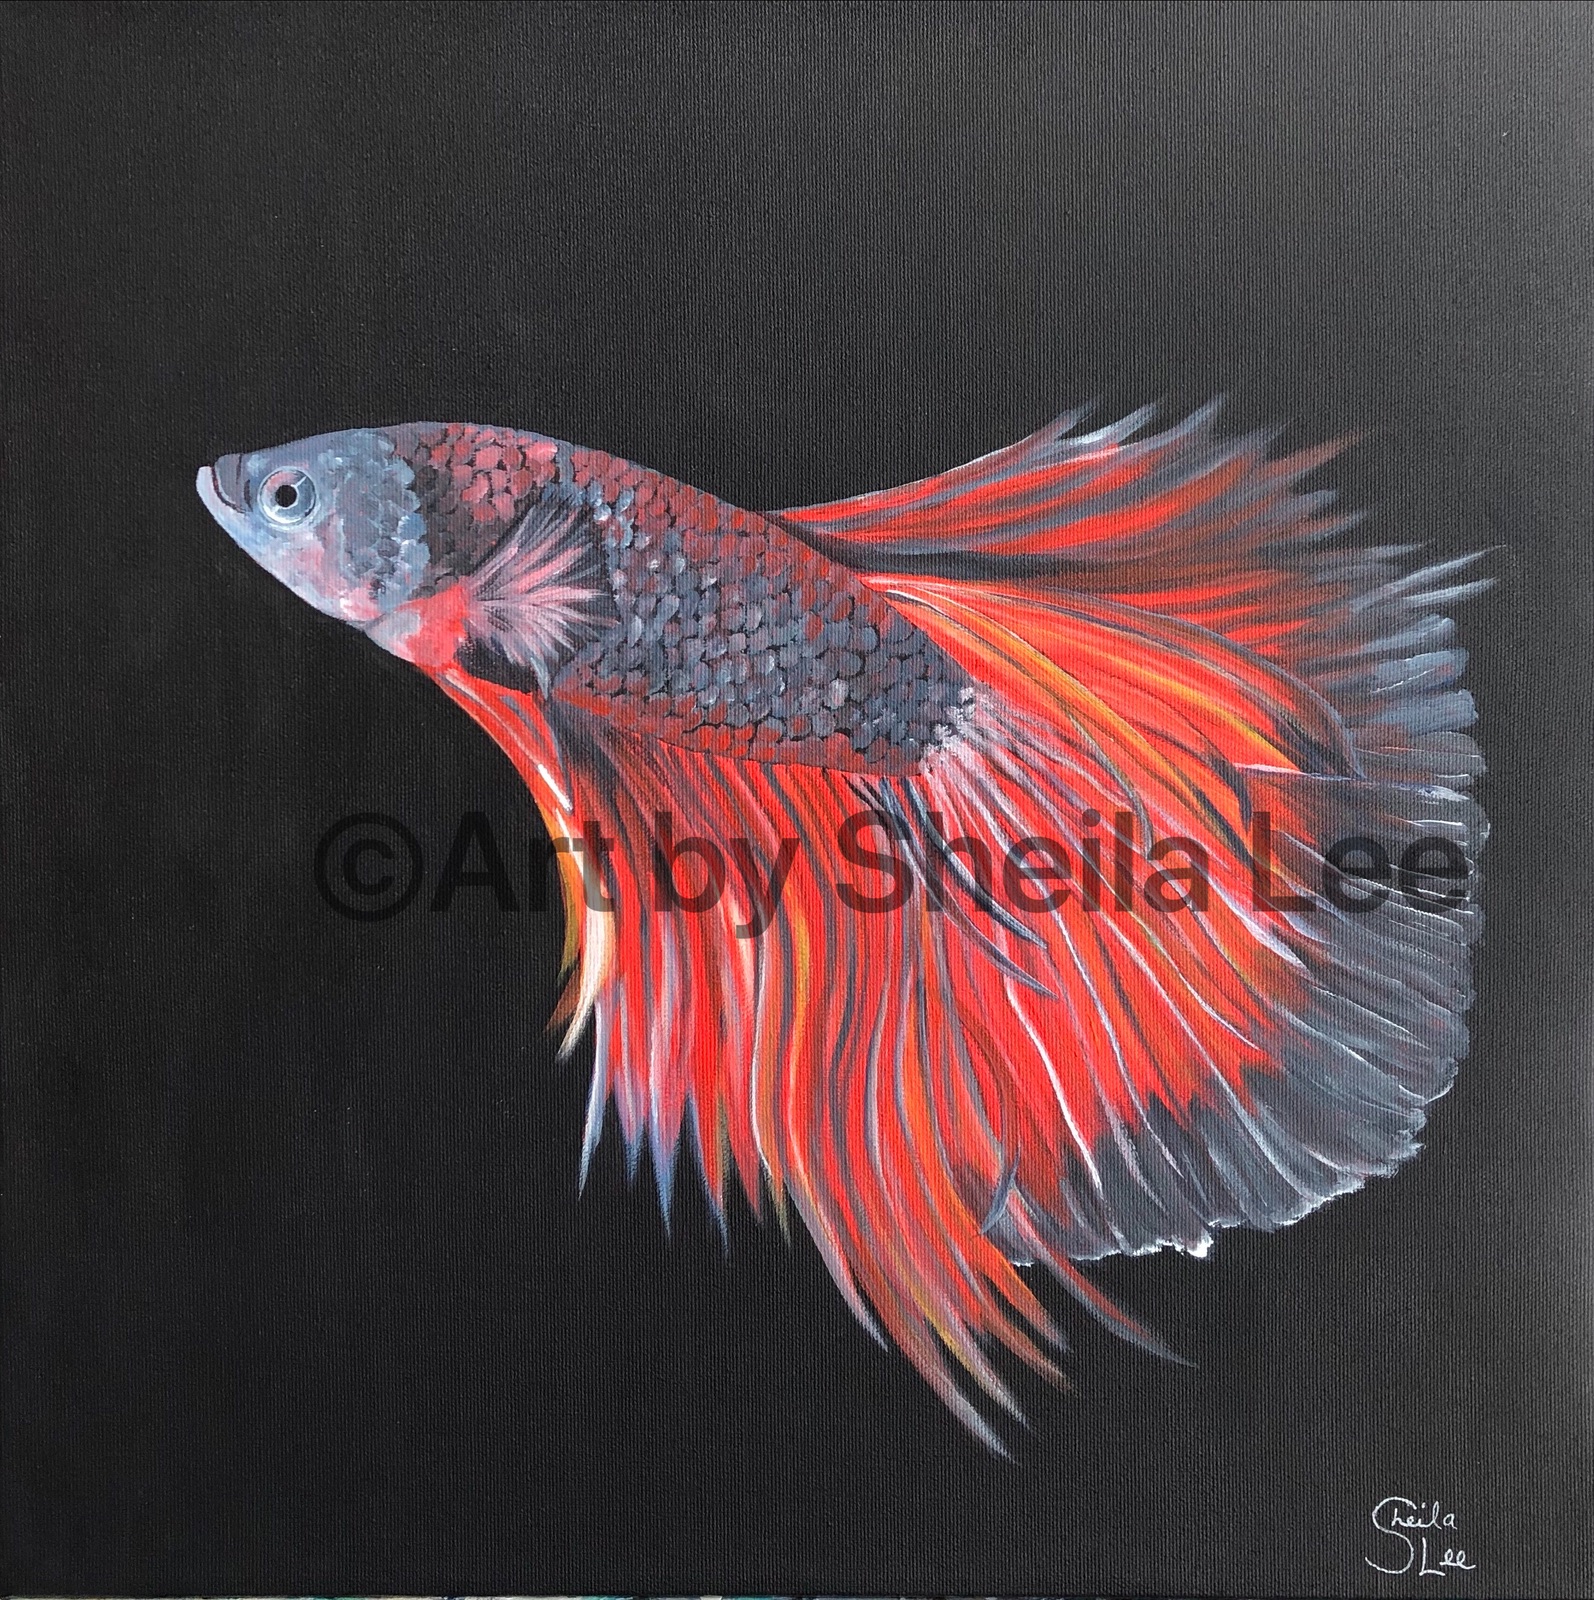 Tranquility is a betta fish painted in Acrylic on a 16" x 16" Gallery Wrapped Canvas.$130.00